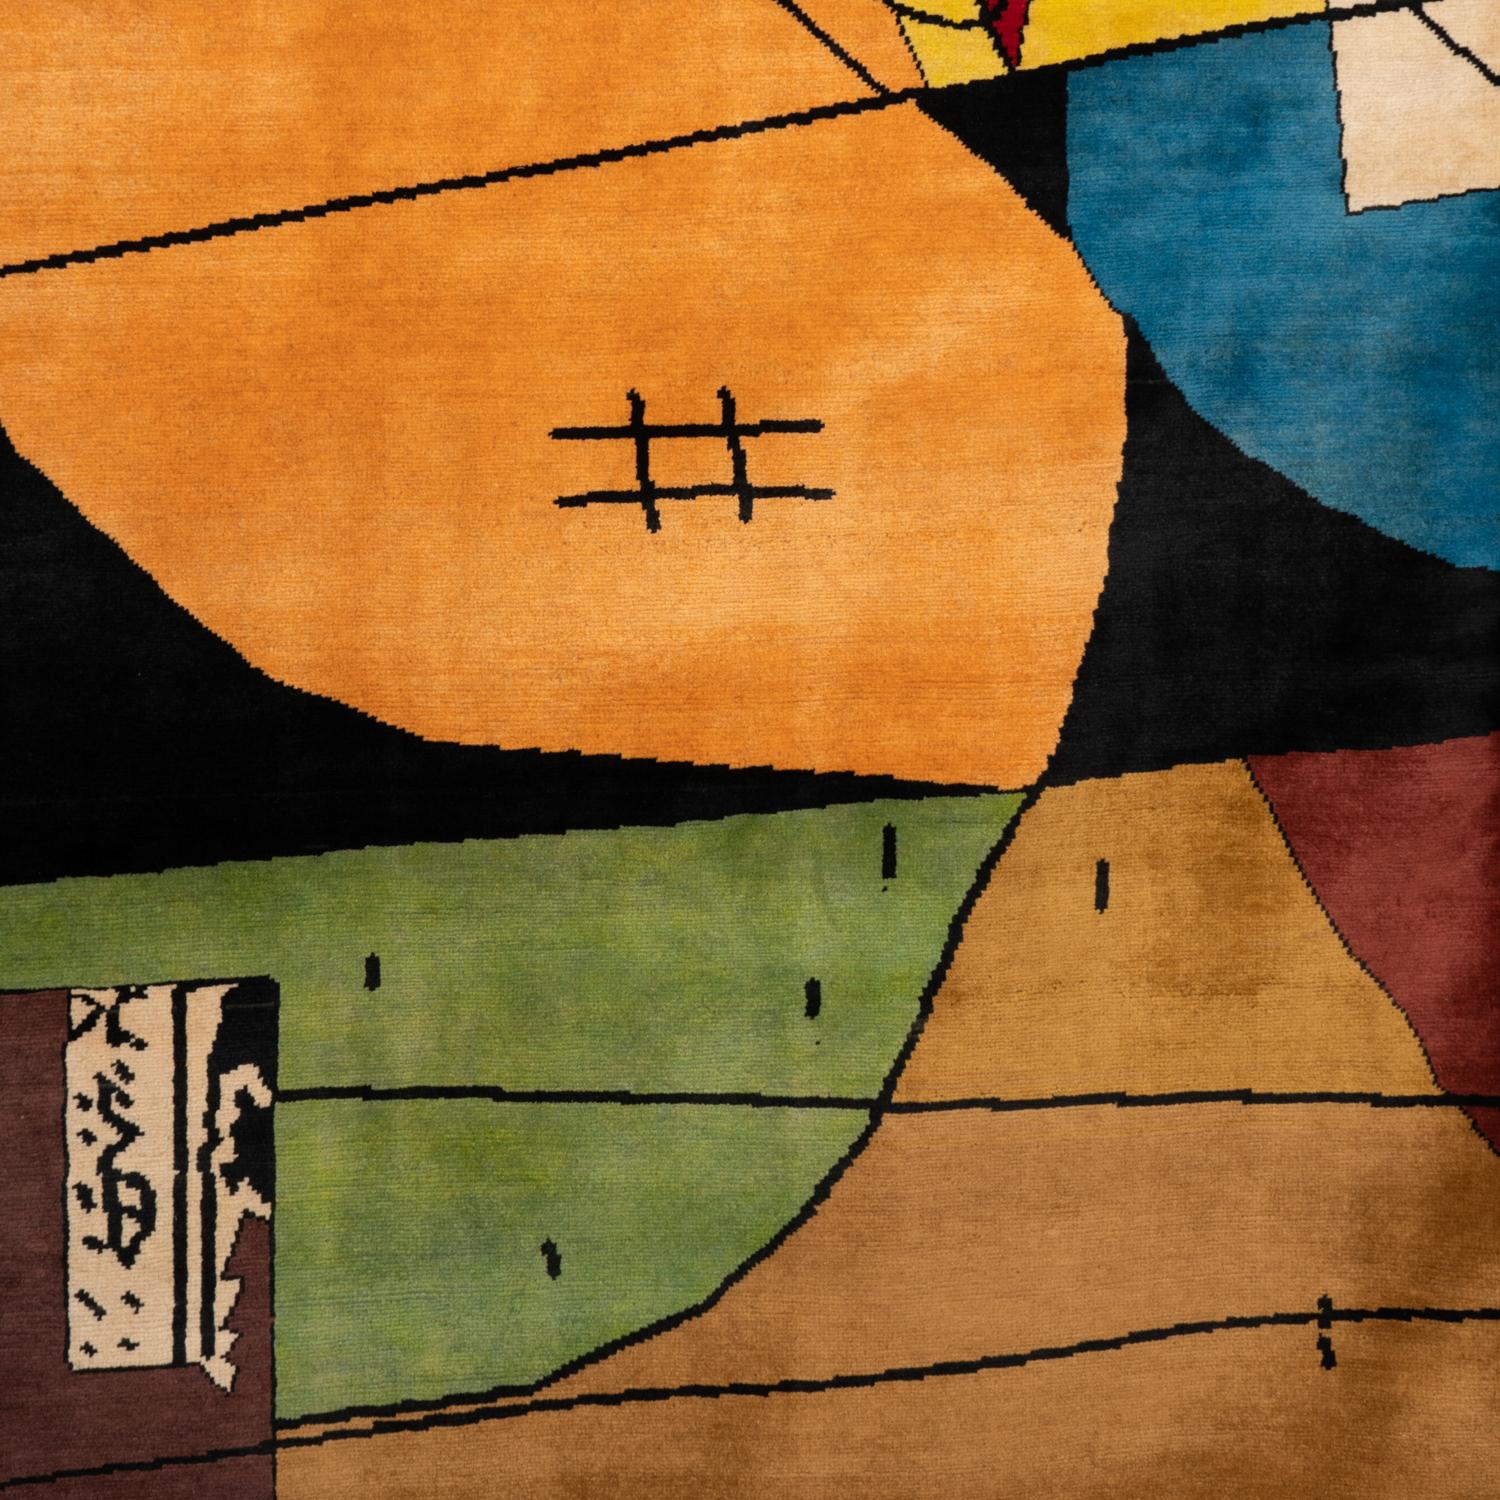 Carpet, or tapestry, after a work by Le Corbusier entitled “Taureau XIII”, dated 1956, in warm colors. Hand-knotted in Merino wool.

Contemporary craftsmanship.

Made to order. Will be numbered 2/8. Surface area: 5 M2. Density: 700,000 knots.

Will